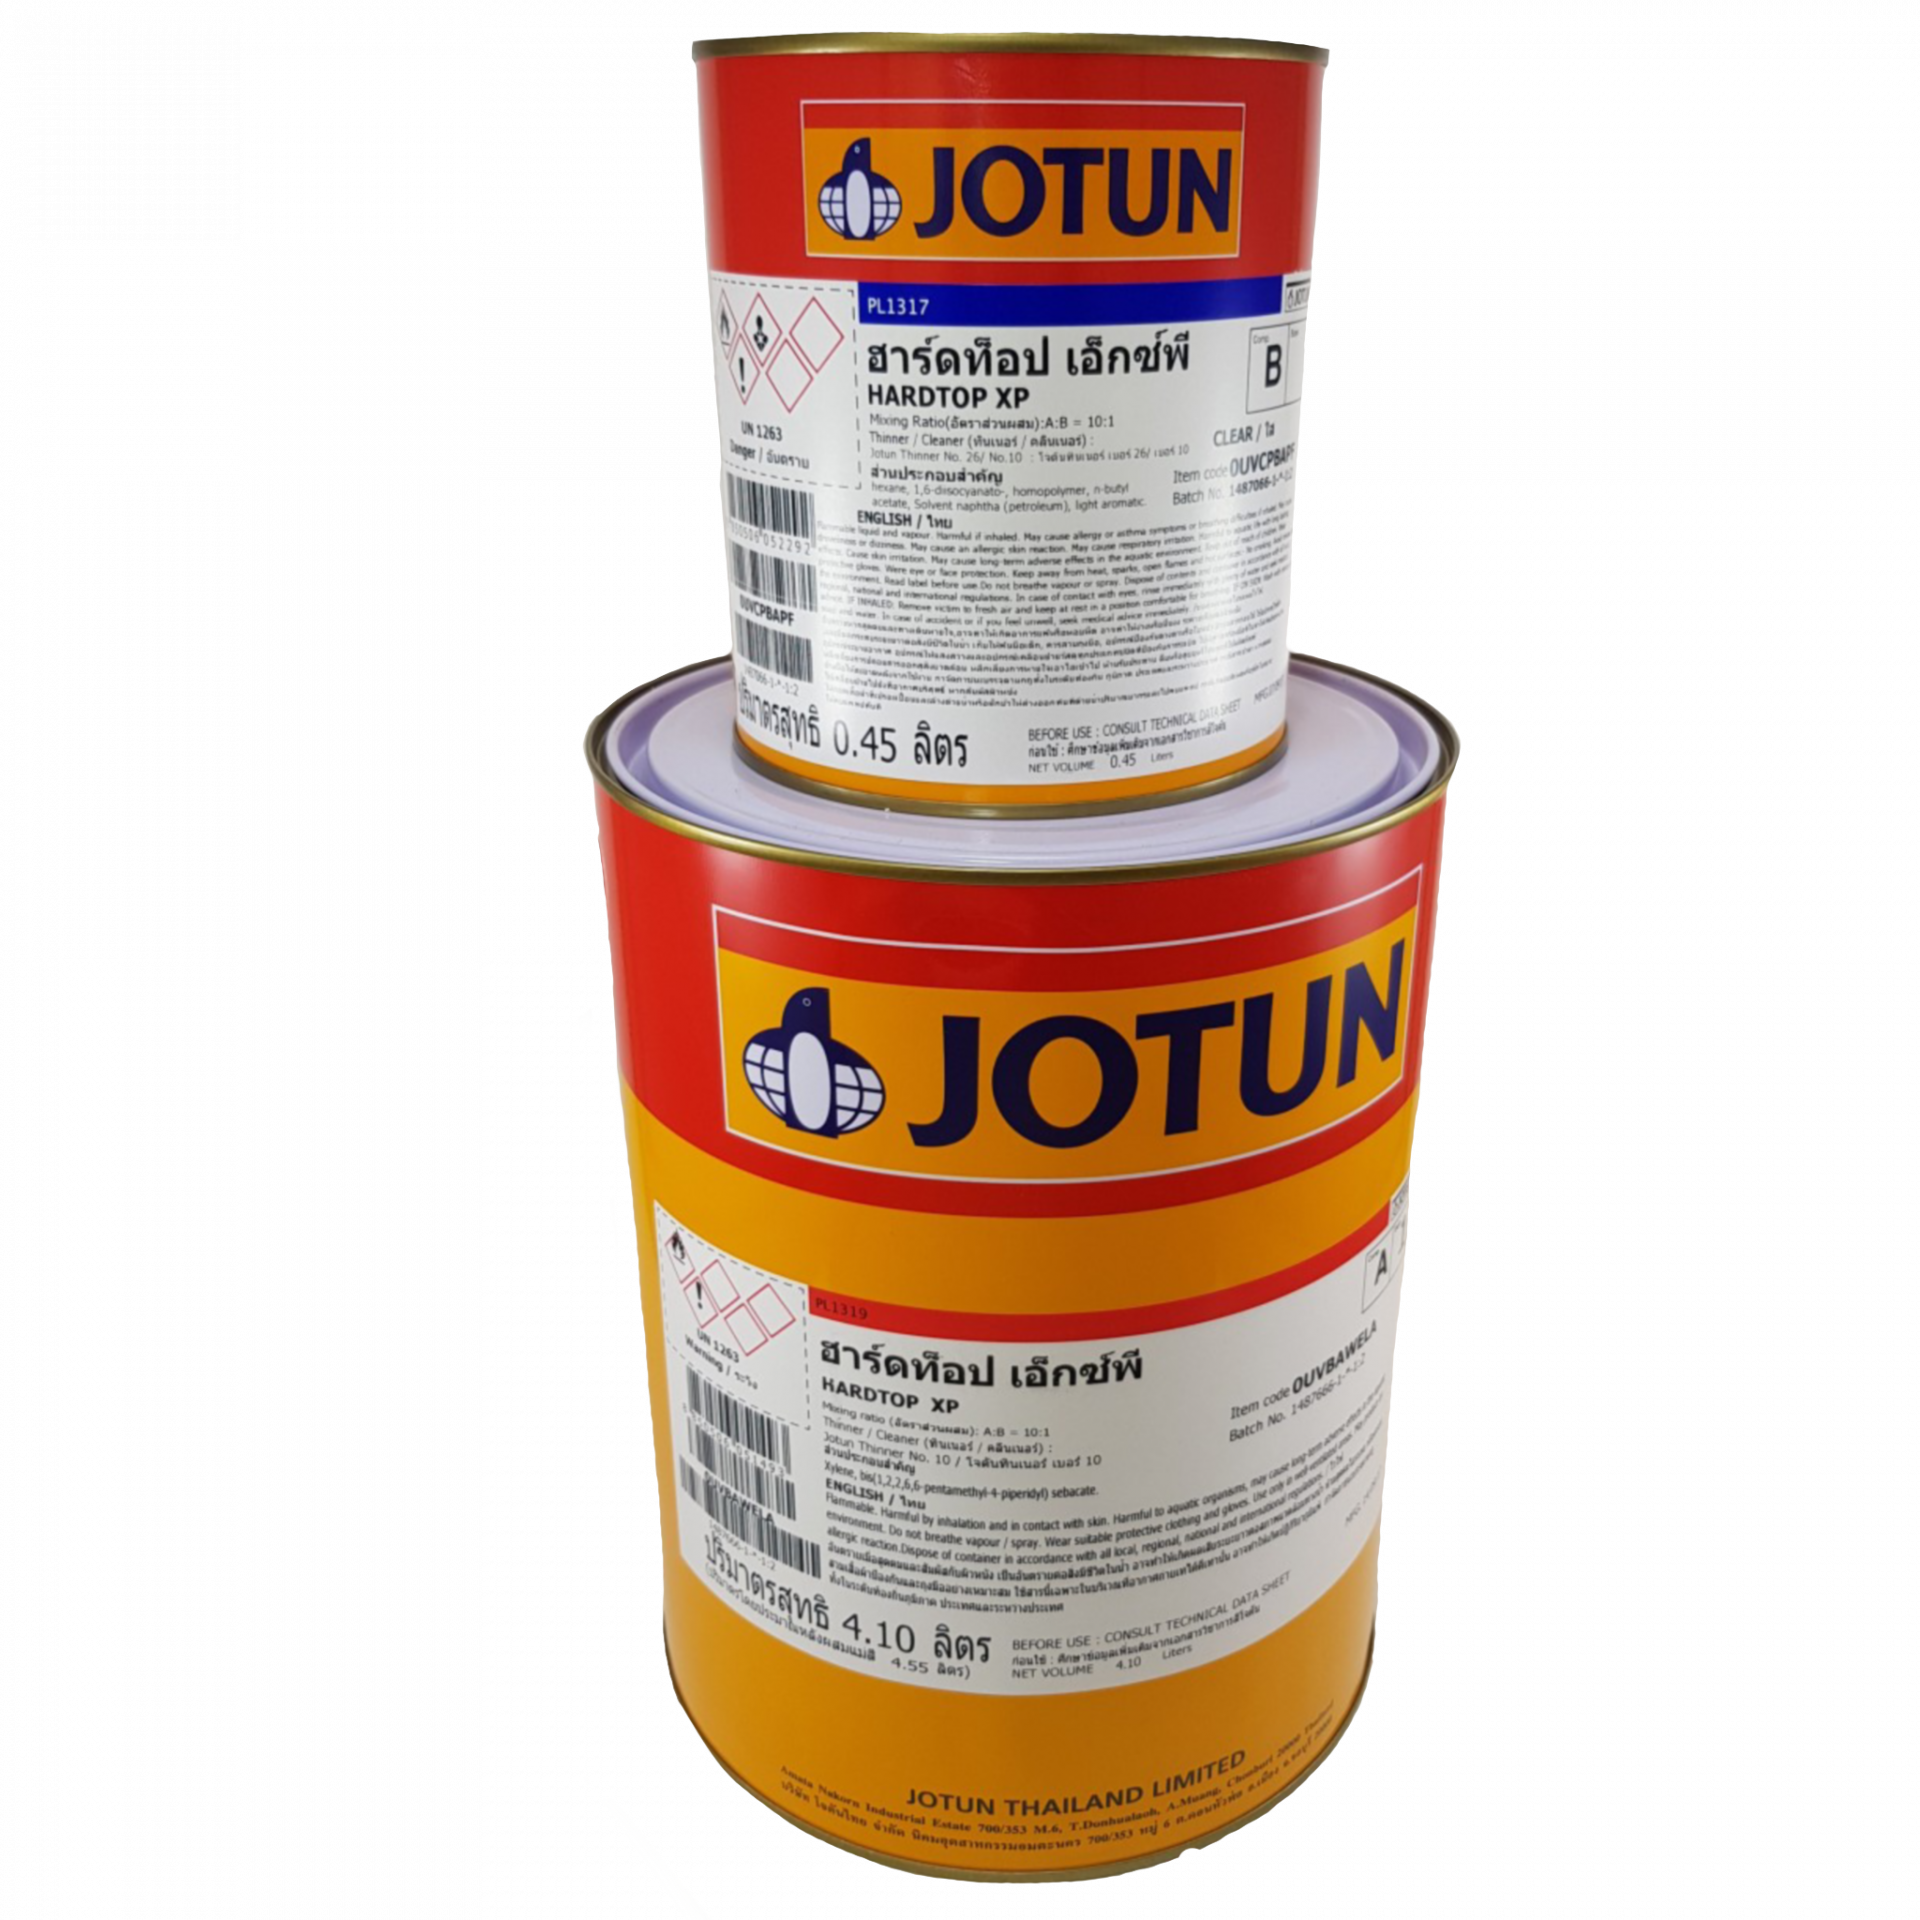 Jotun Hardtop XP  is a two-component, high solids